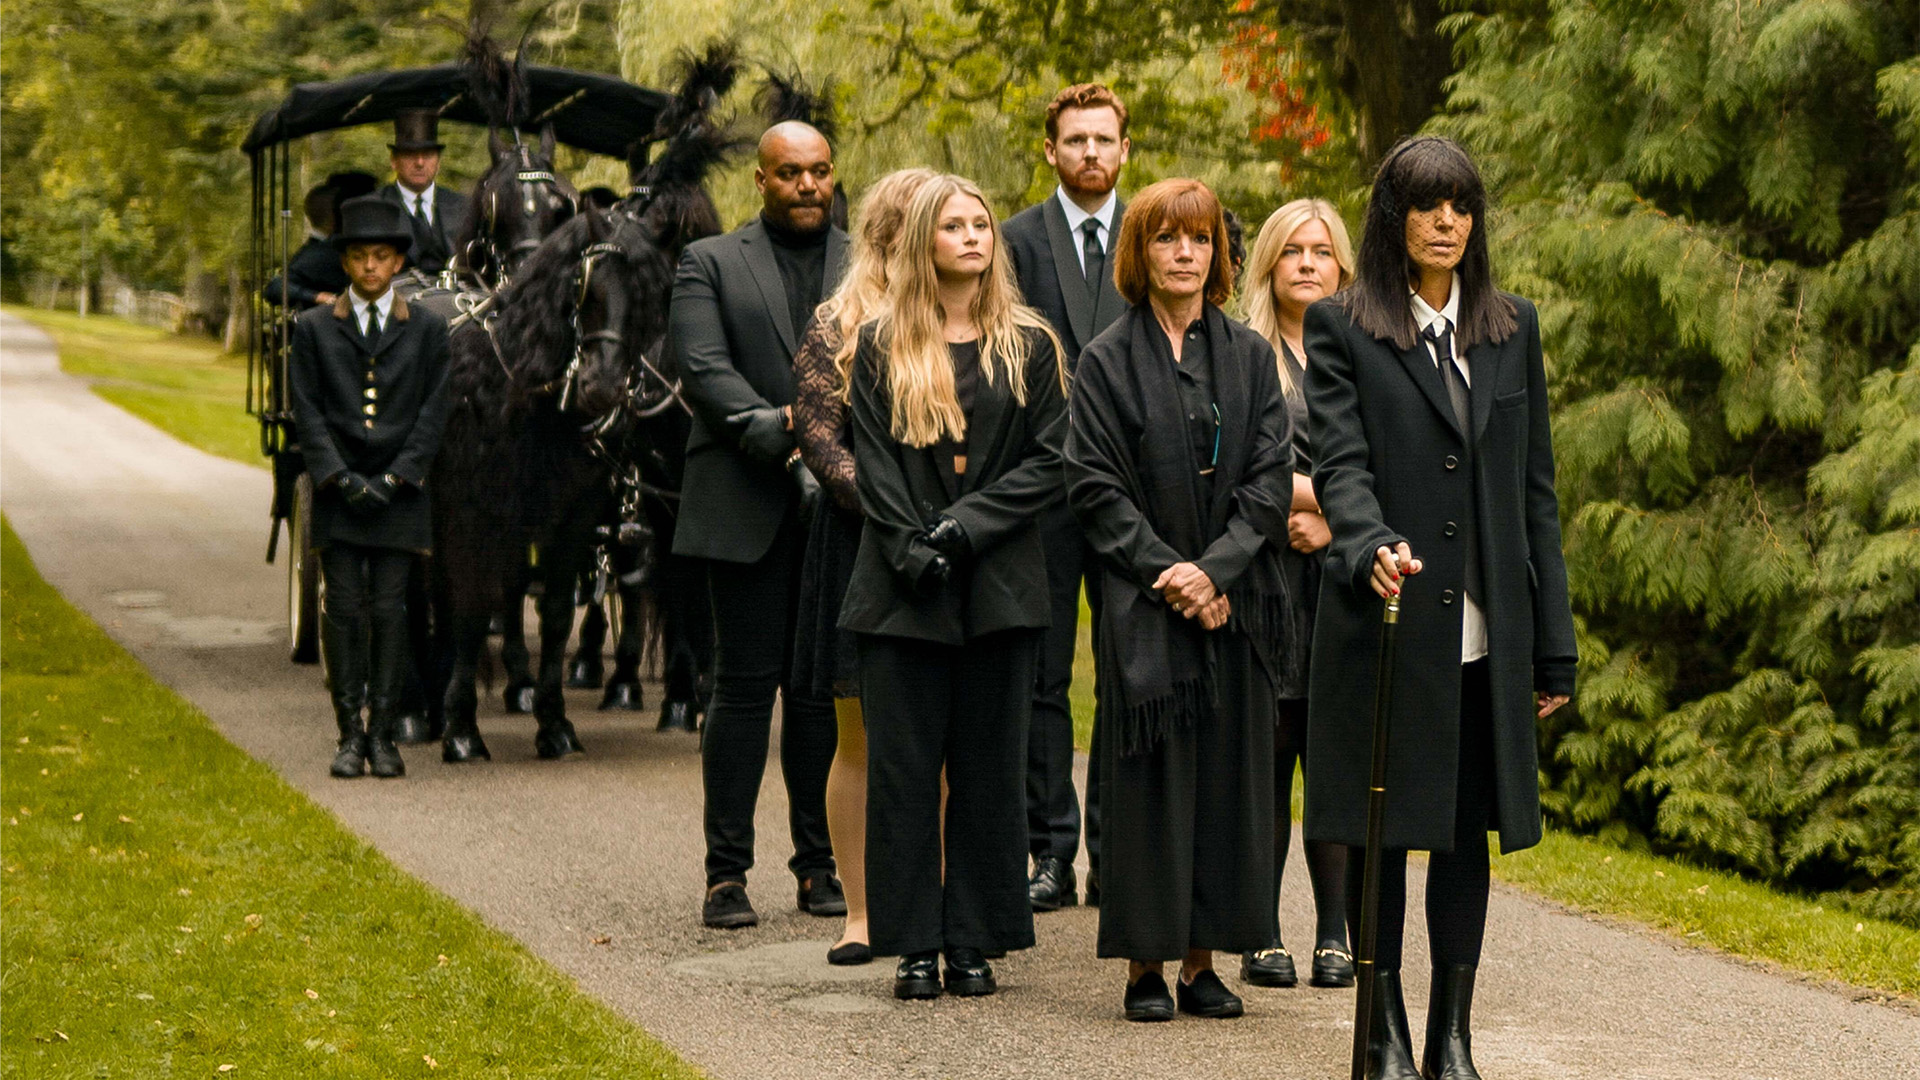 Claudia Winkleman leads Diane's funeral. The Traitors